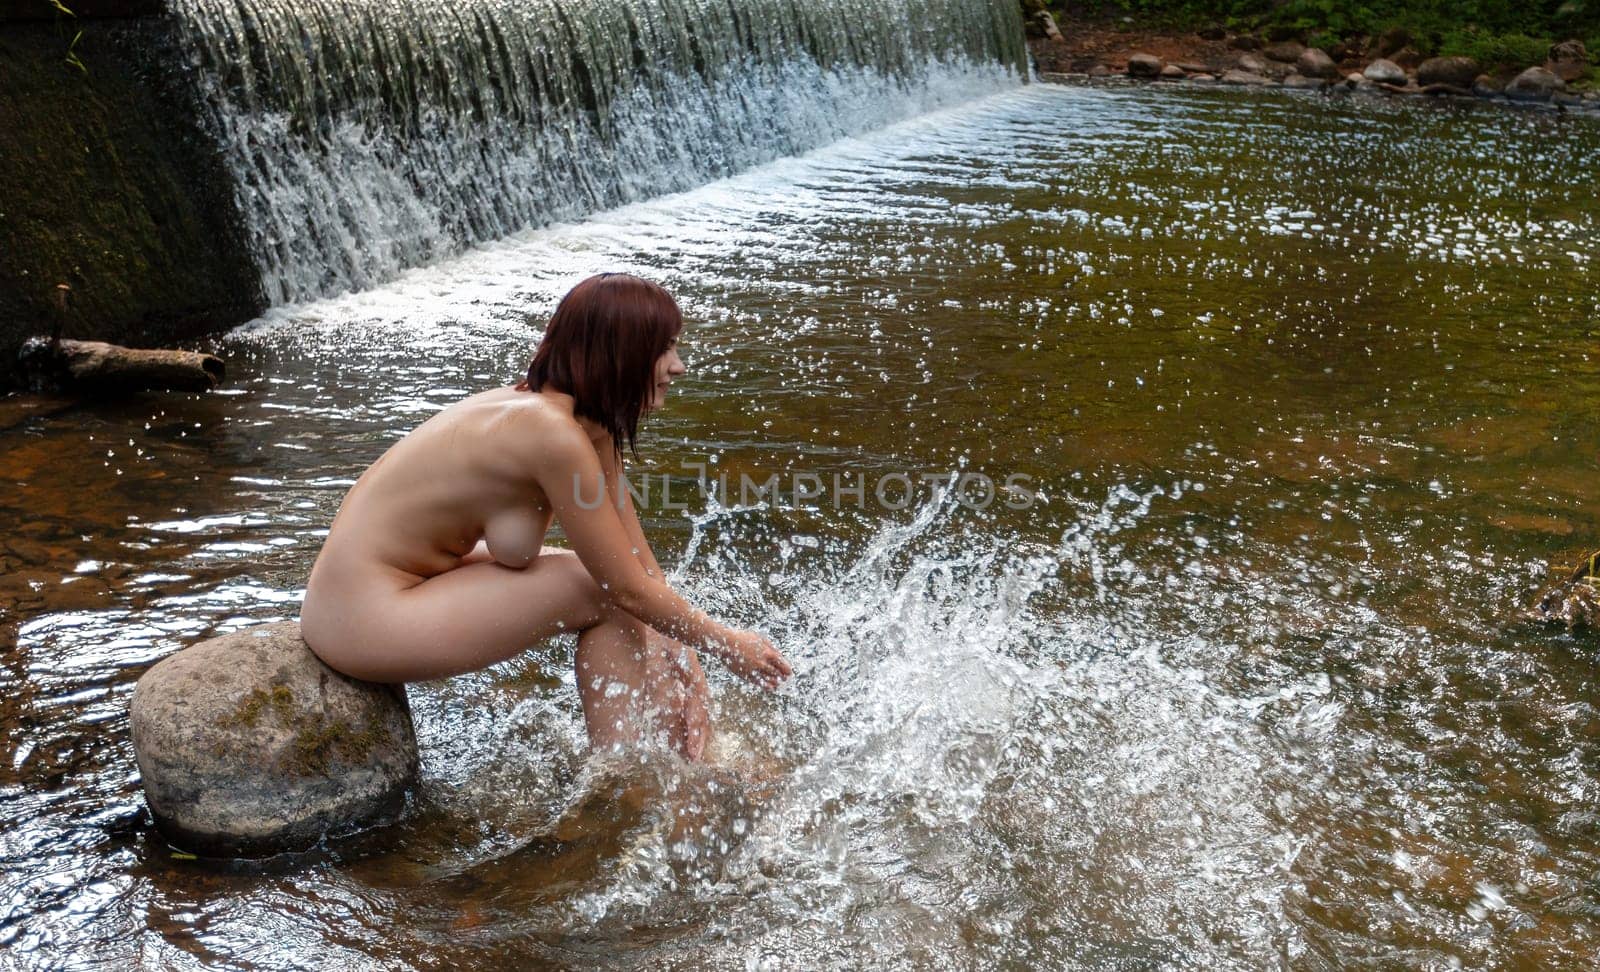 Young nude woman enjoying the fresh coolness near a forest stream with a waterfall